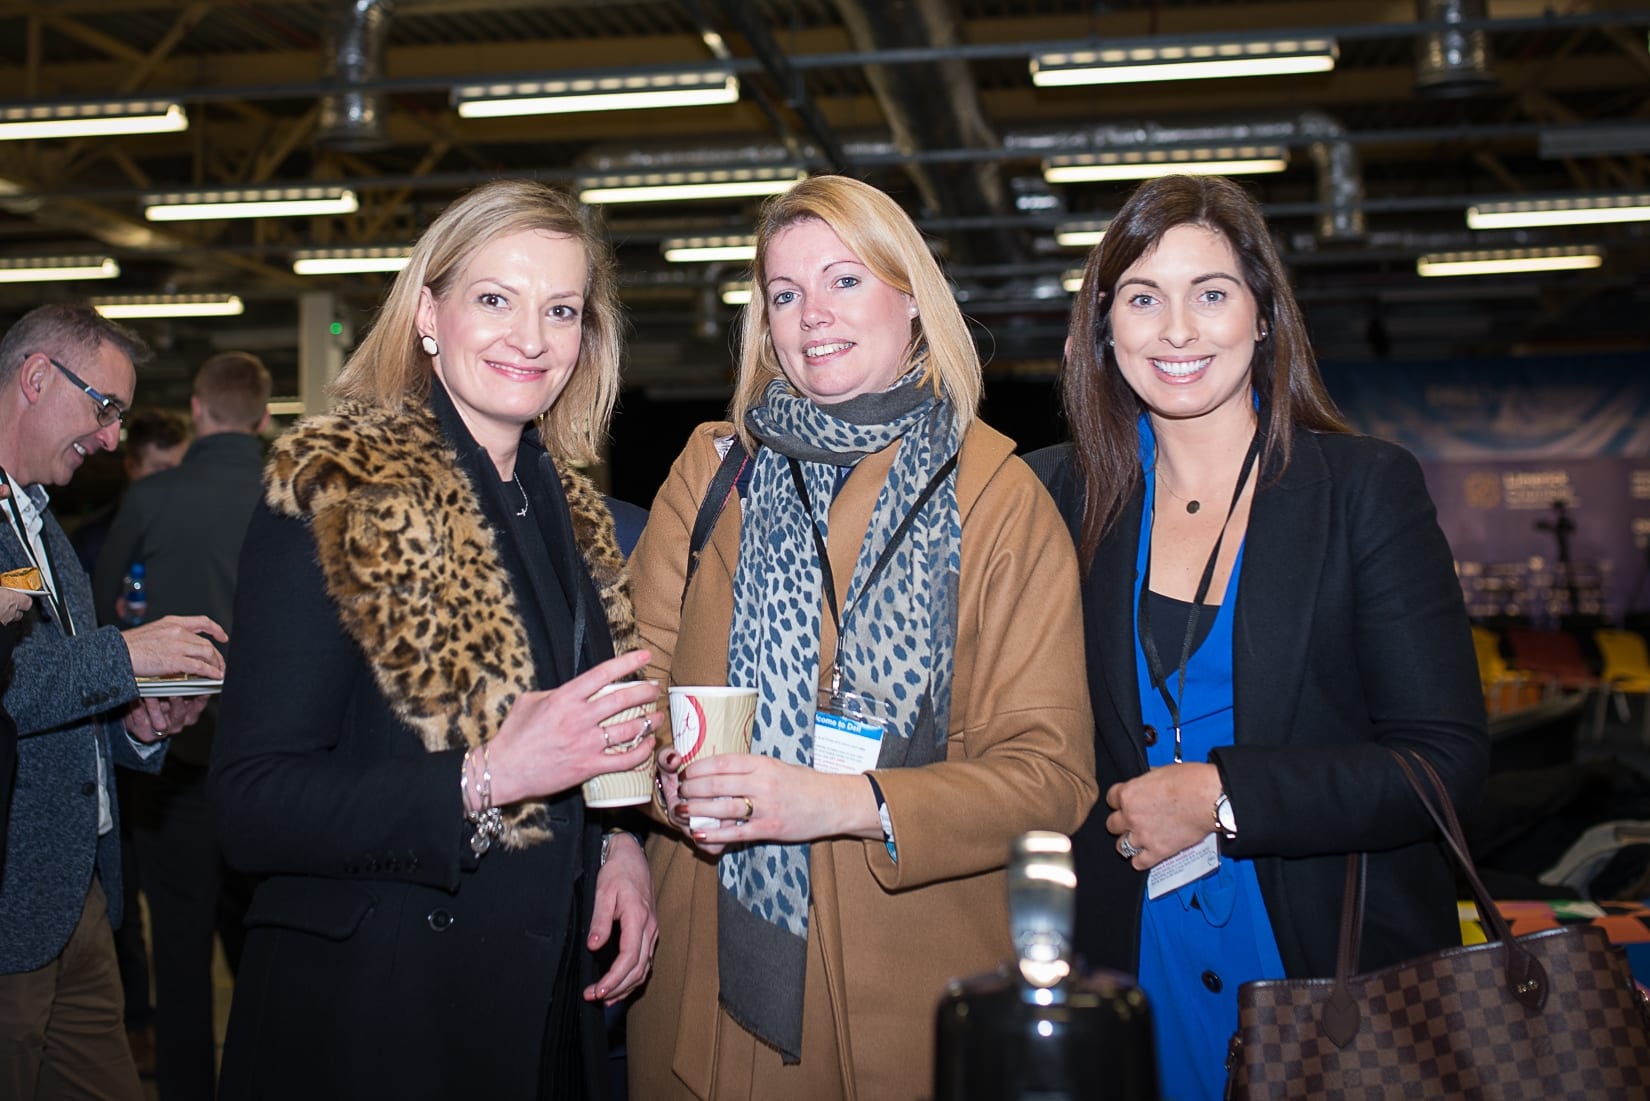 At the Limerick Chamber Regional Leaders programme in Dell, sponsored by Dell EMC, in association with Kemmy Business School UL, was From left to right: Paulina Wysocka- BOI, Emer McGrath - BOI, Deirdre Geaney- First Names